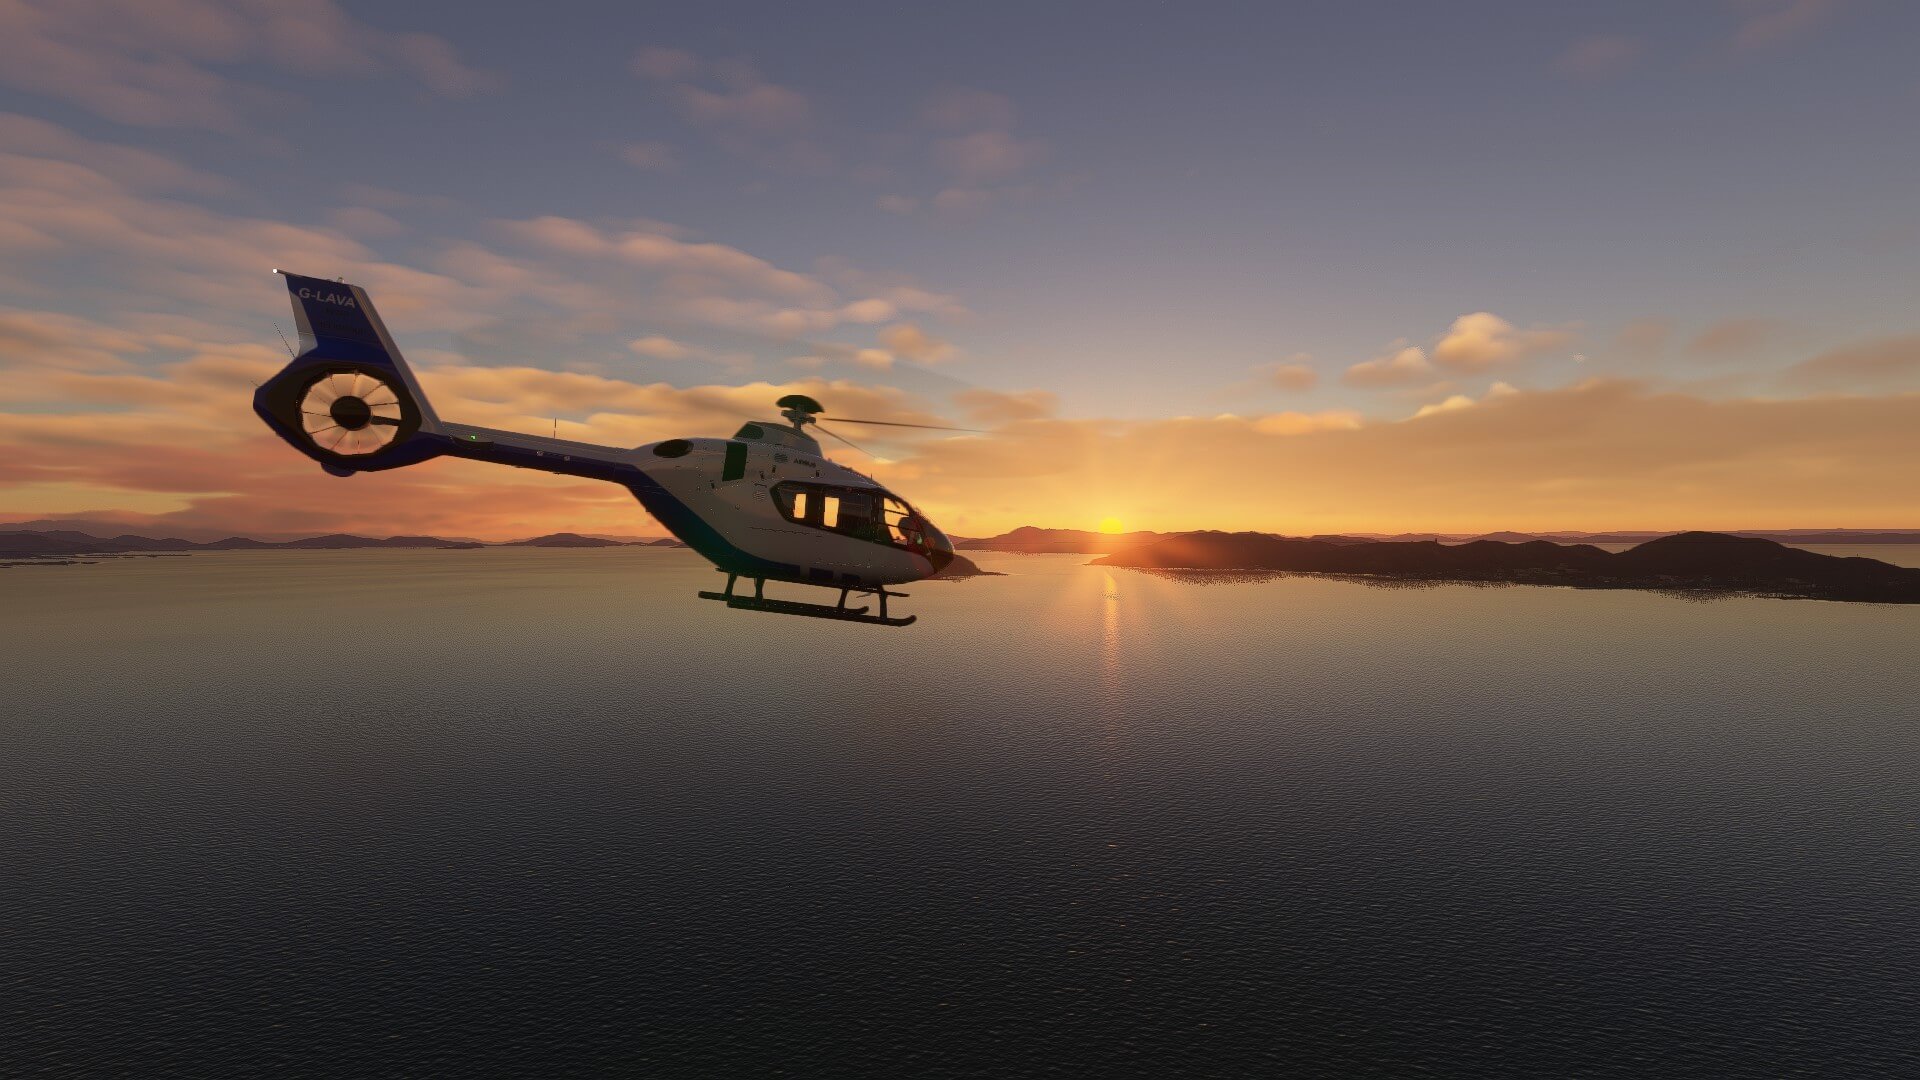 A helicopter flies over a lake as the sun sets in the distance.